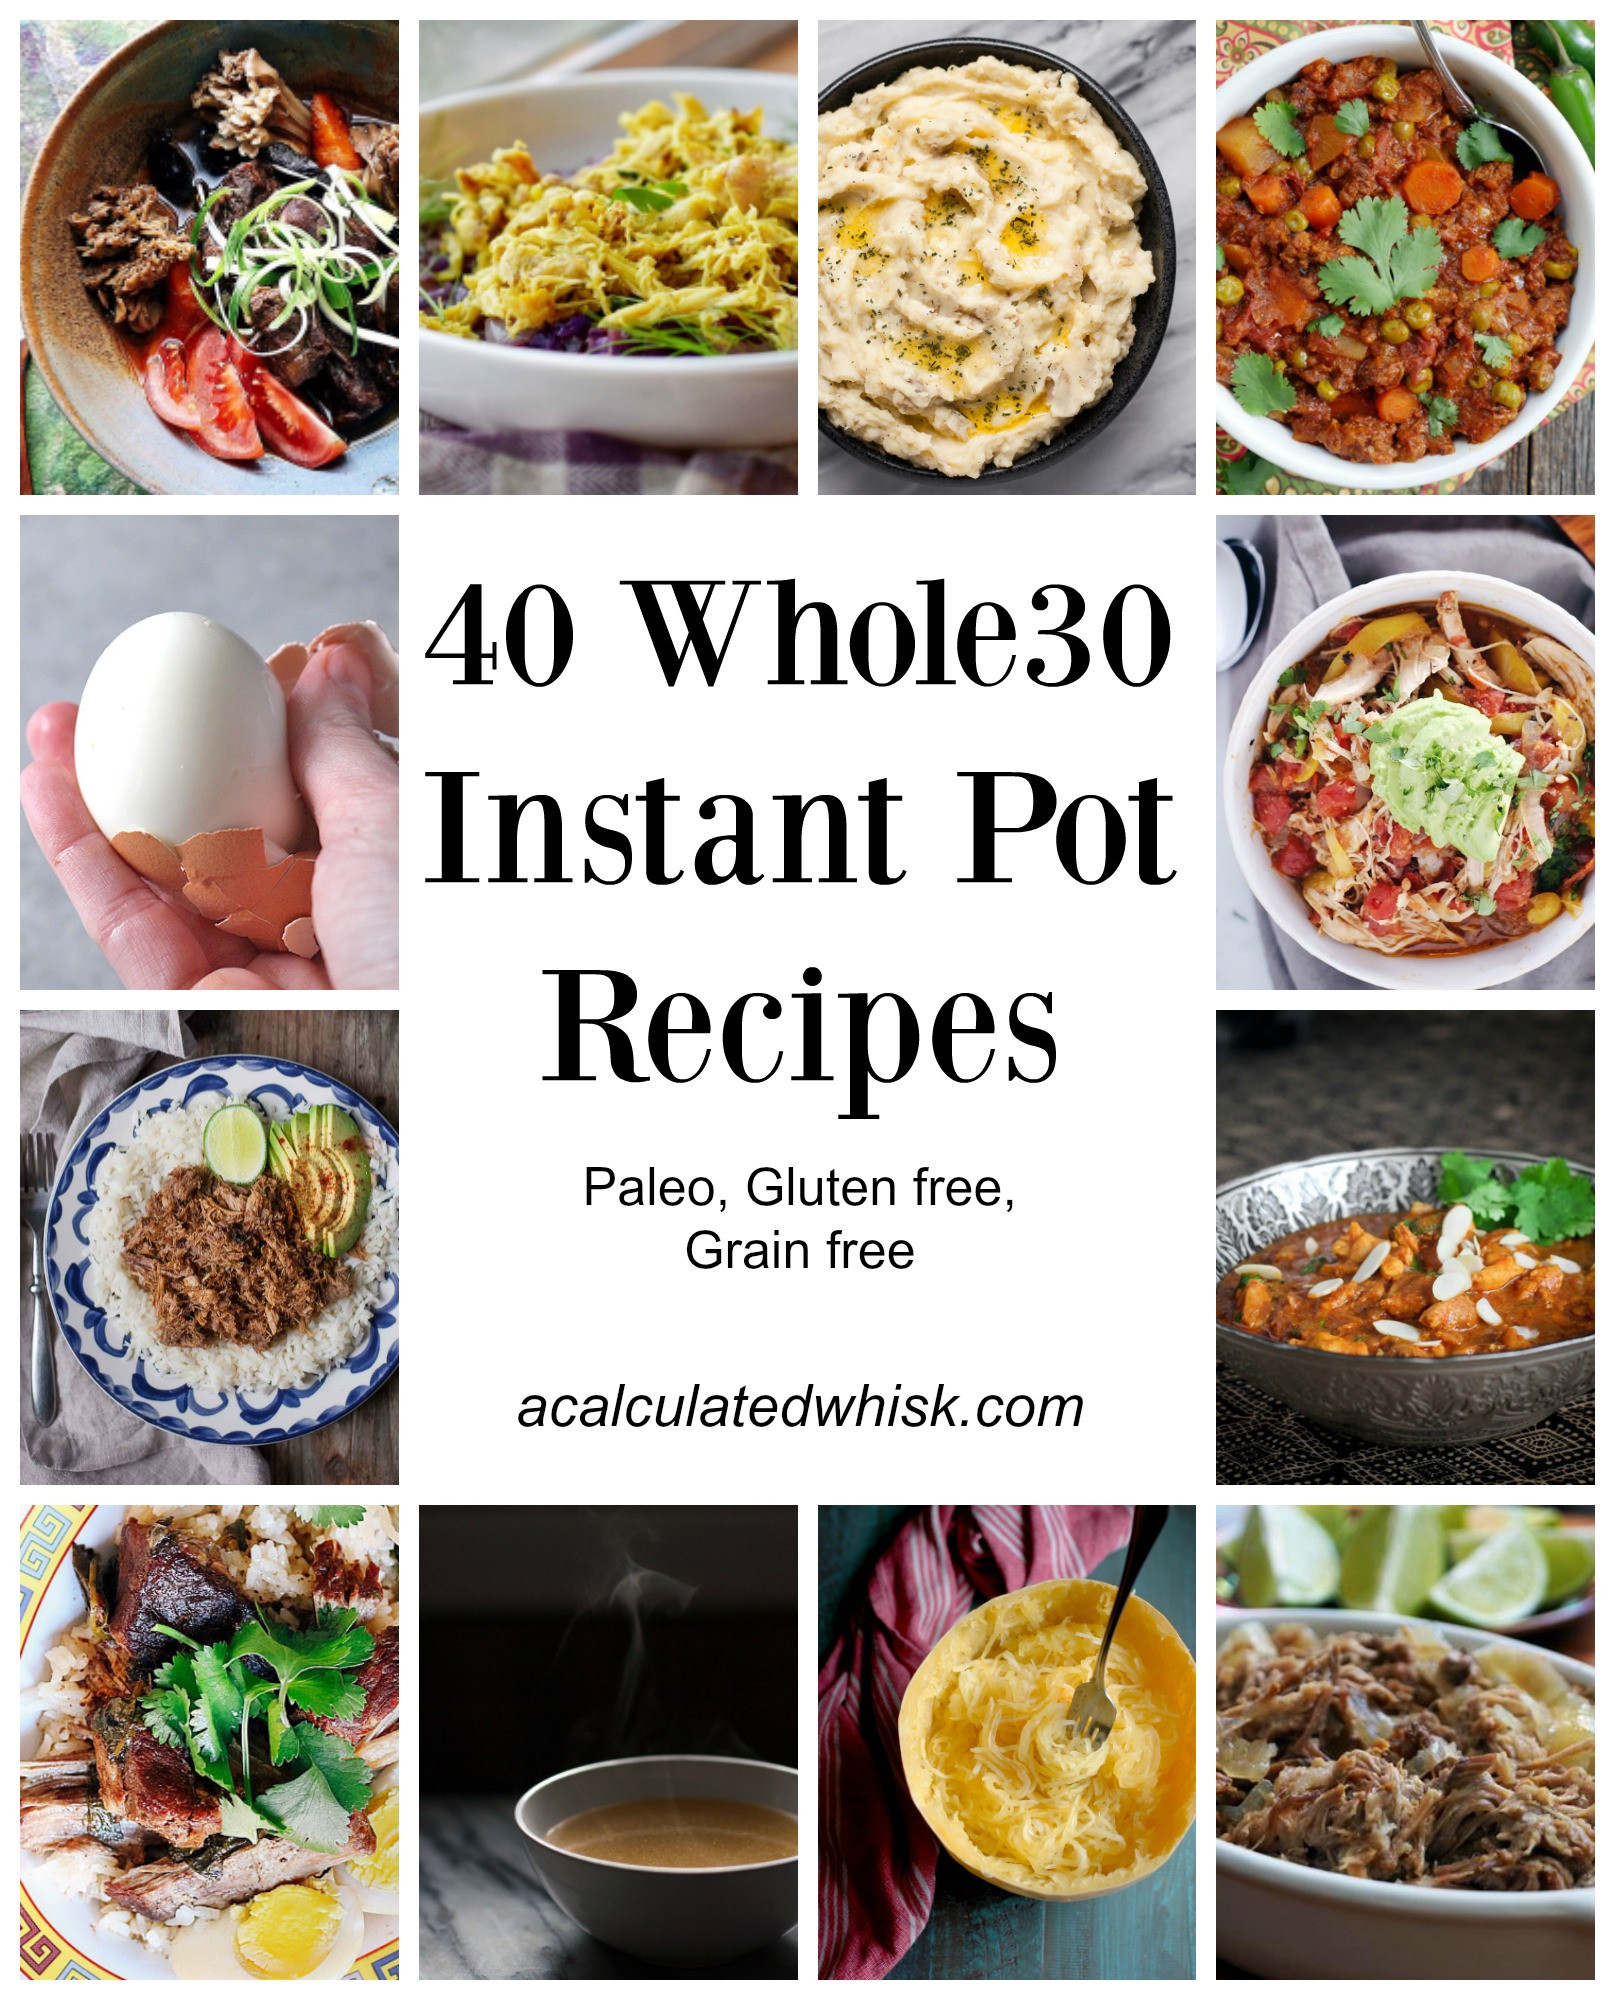 Paleo Instant Pot Recipes
 40 Whole30 Instant Pot Recipes A Calculated Whisk